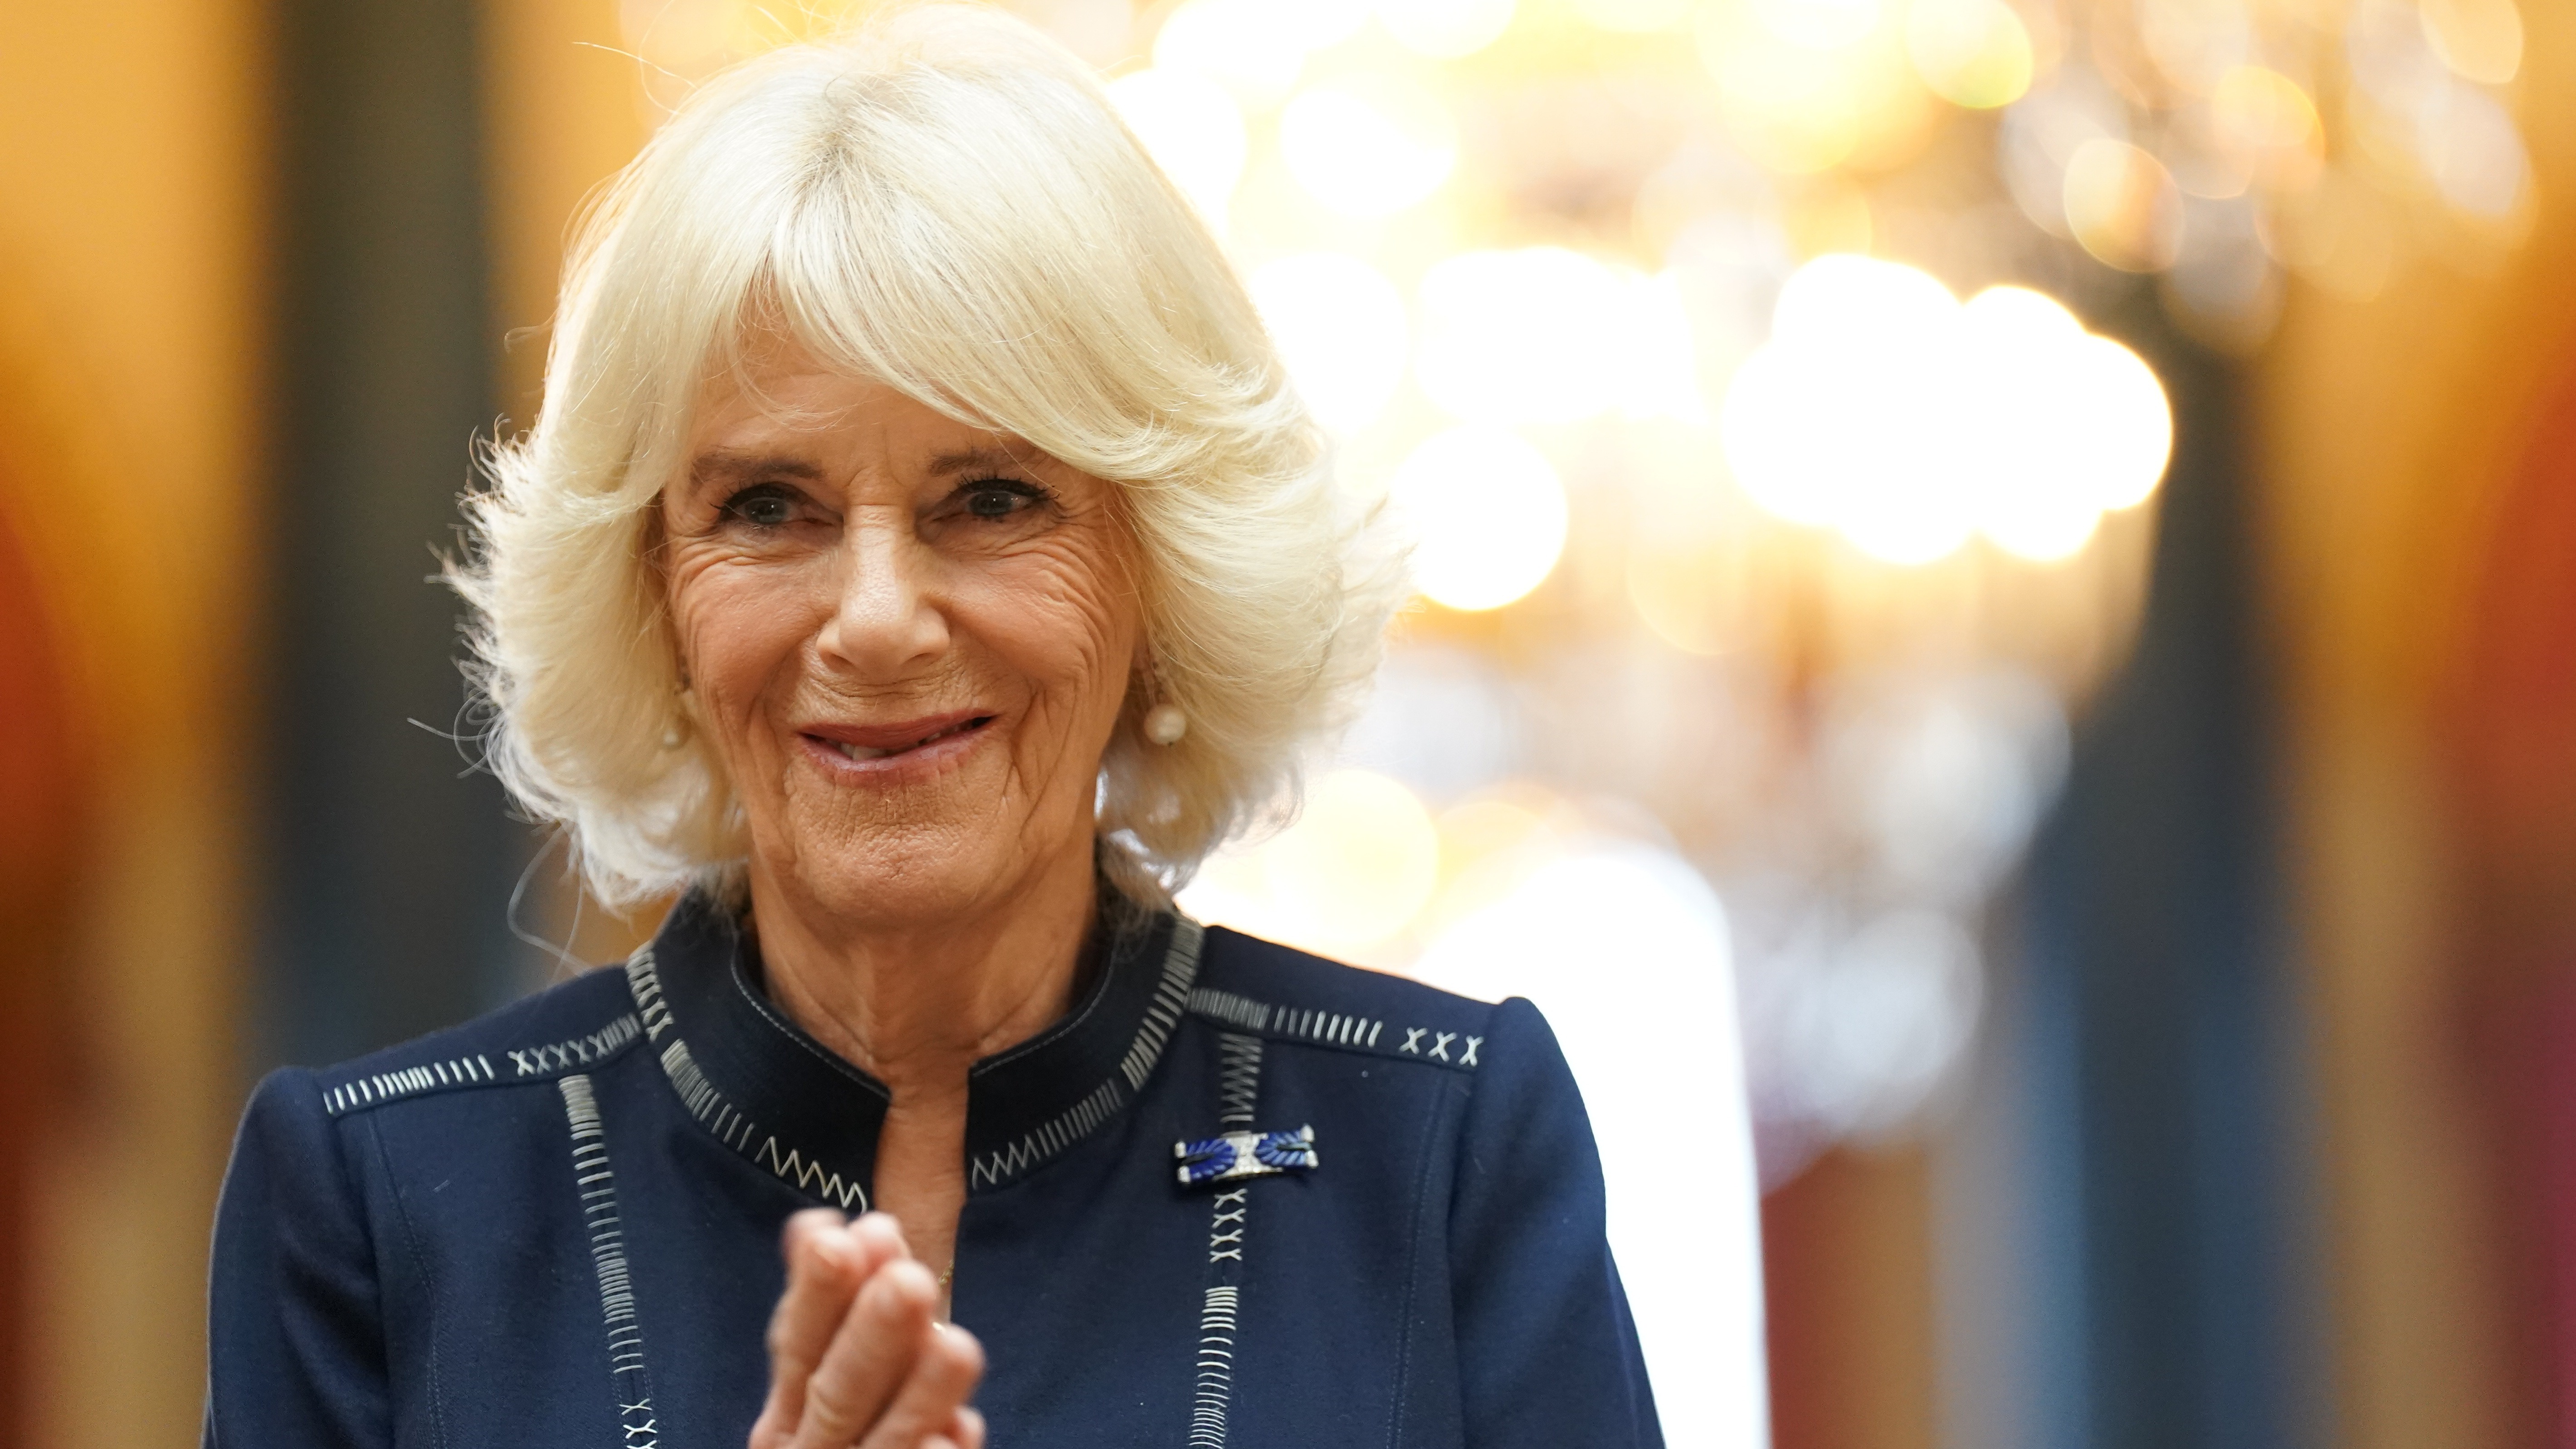 Camilla appoints trusted friends as ‘Queen’s companions’ | ITV News